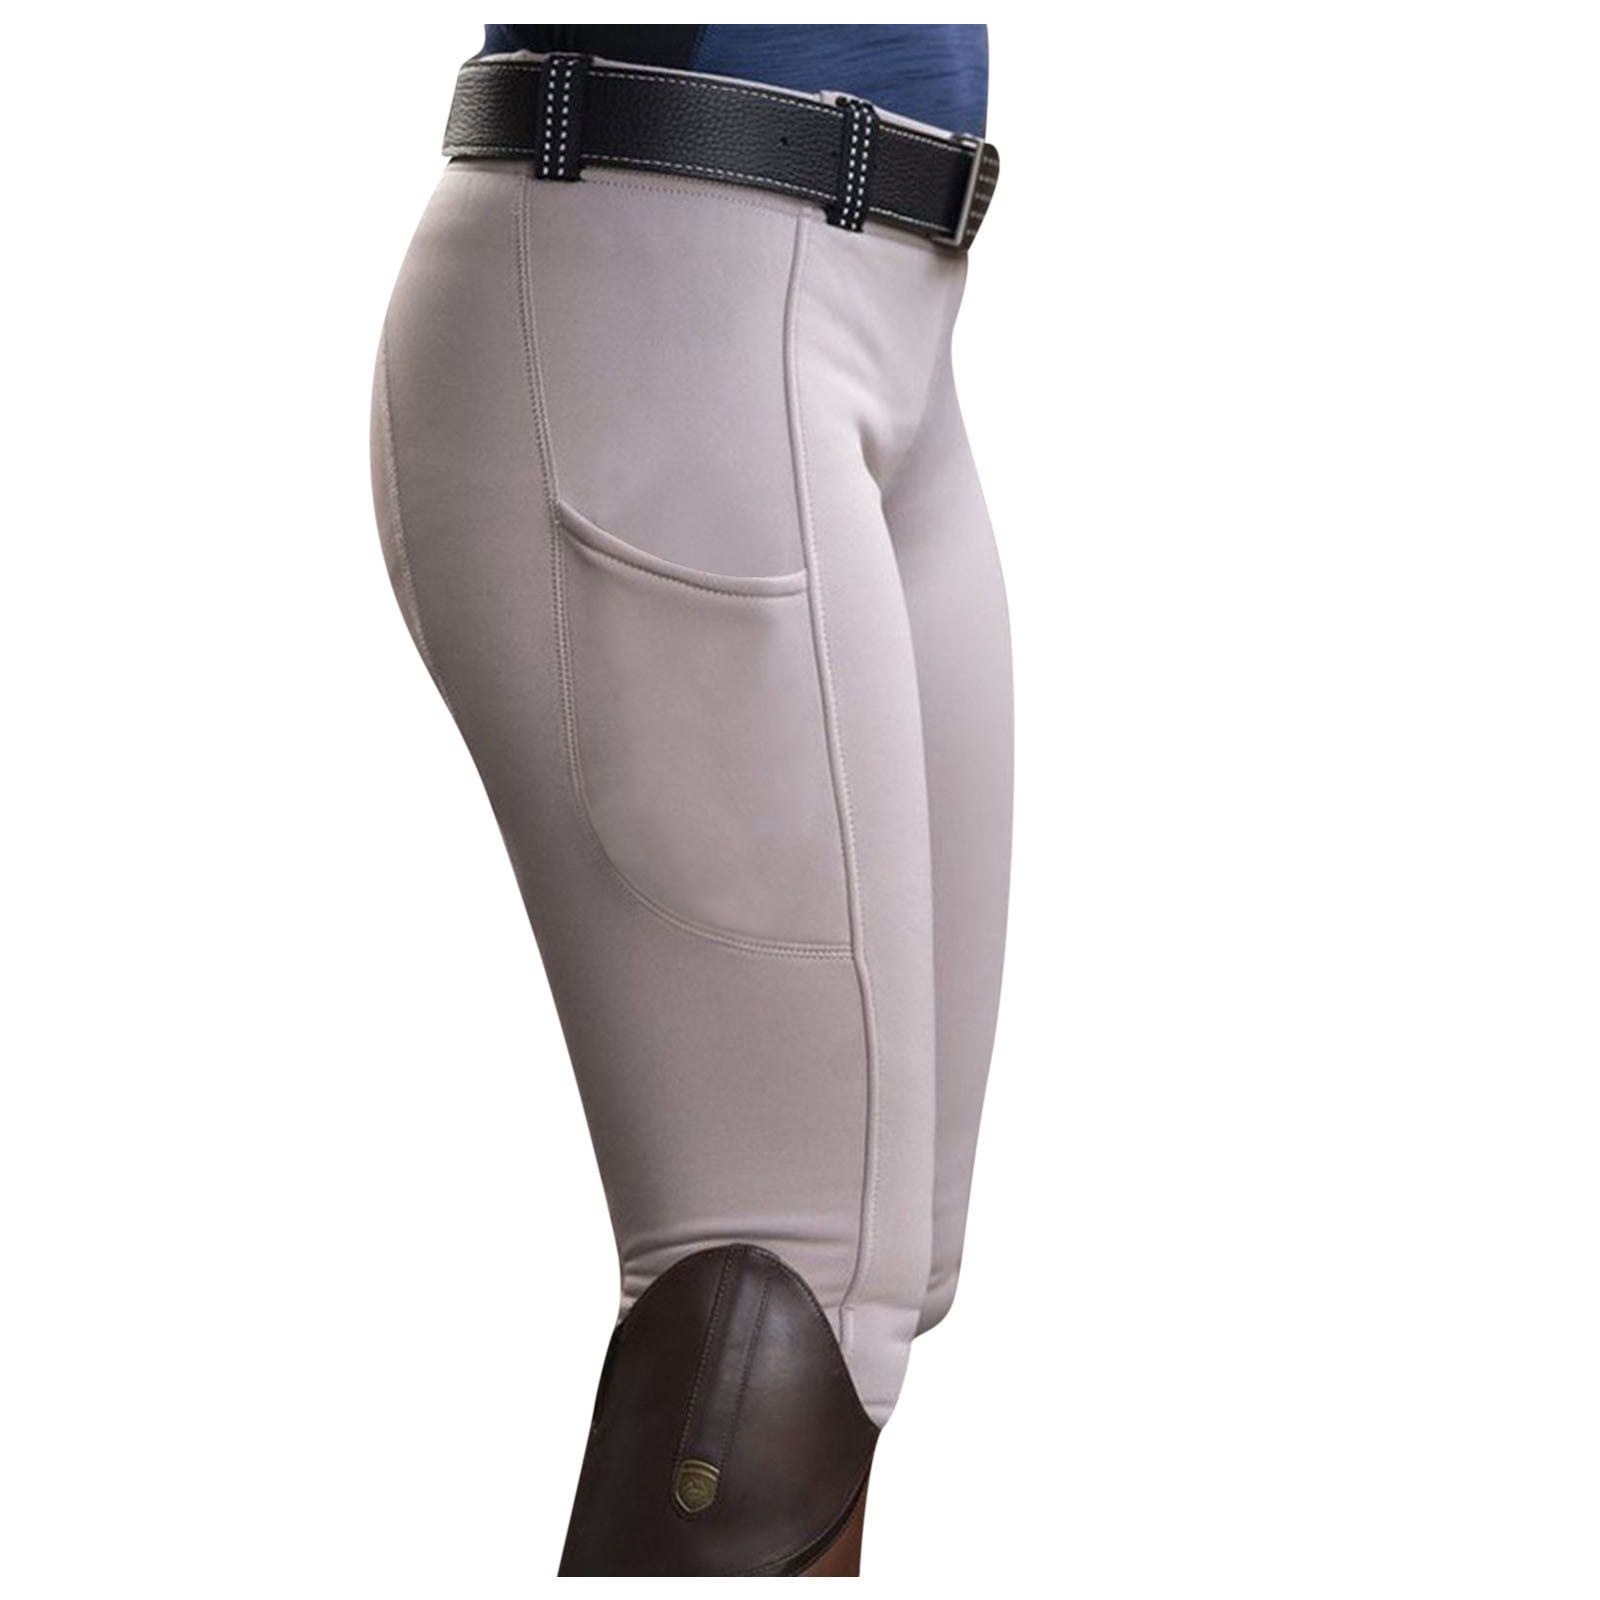 Details about   Women's Riding Trousers Exercise High Waist Sports pants Equestrian Trousers 